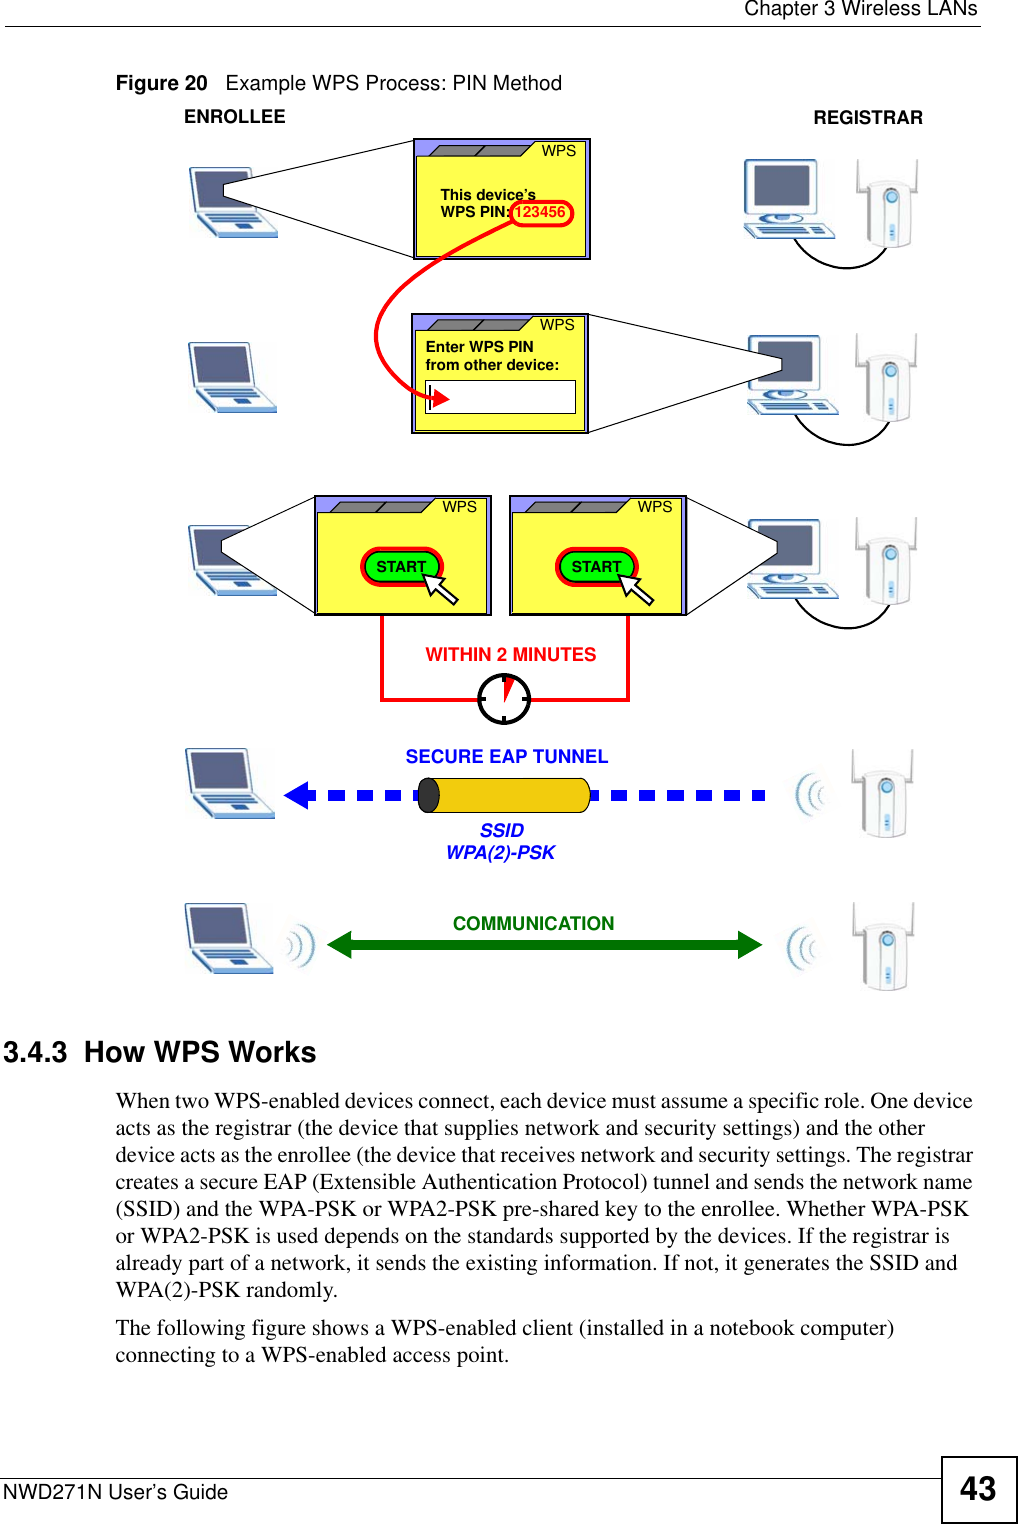  Chapter 3 Wireless LANsNWD271N User’s Guide 43Figure 20   Example WPS Process: PIN Method3.4.3  How WPS WorksWhen two WPS-enabled devices connect, each device must assume a specific role. One device acts as the registrar (the device that supplies network and security settings) and the other device acts as the enrollee (the device that receives network and security settings. The registrar creates a secure EAP (Extensible Authentication Protocol) tunnel and sends the network name (SSID) and the WPA-PSK or WPA2-PSK pre-shared key to the enrollee. Whether WPA-PSK or WPA2-PSK is used depends on the standards supported by the devices. If the registrar is already part of a network, it sends the existing information. If not, it generates the SSID and WPA(2)-PSK randomly.The following figure shows a WPS-enabled client (installed in a notebook computer) connecting to a WPS-enabled access point.ENROLLEESECURE EAP TUNNELSSIDWPA(2)-PSKWITHIN 2 MINUTESCOMMUNICATIONThis device’s WPSEnter WPS PIN  WPSfrom other device: WPS PIN: 123456WPSSTARTWPSSTARTREGISTRAR